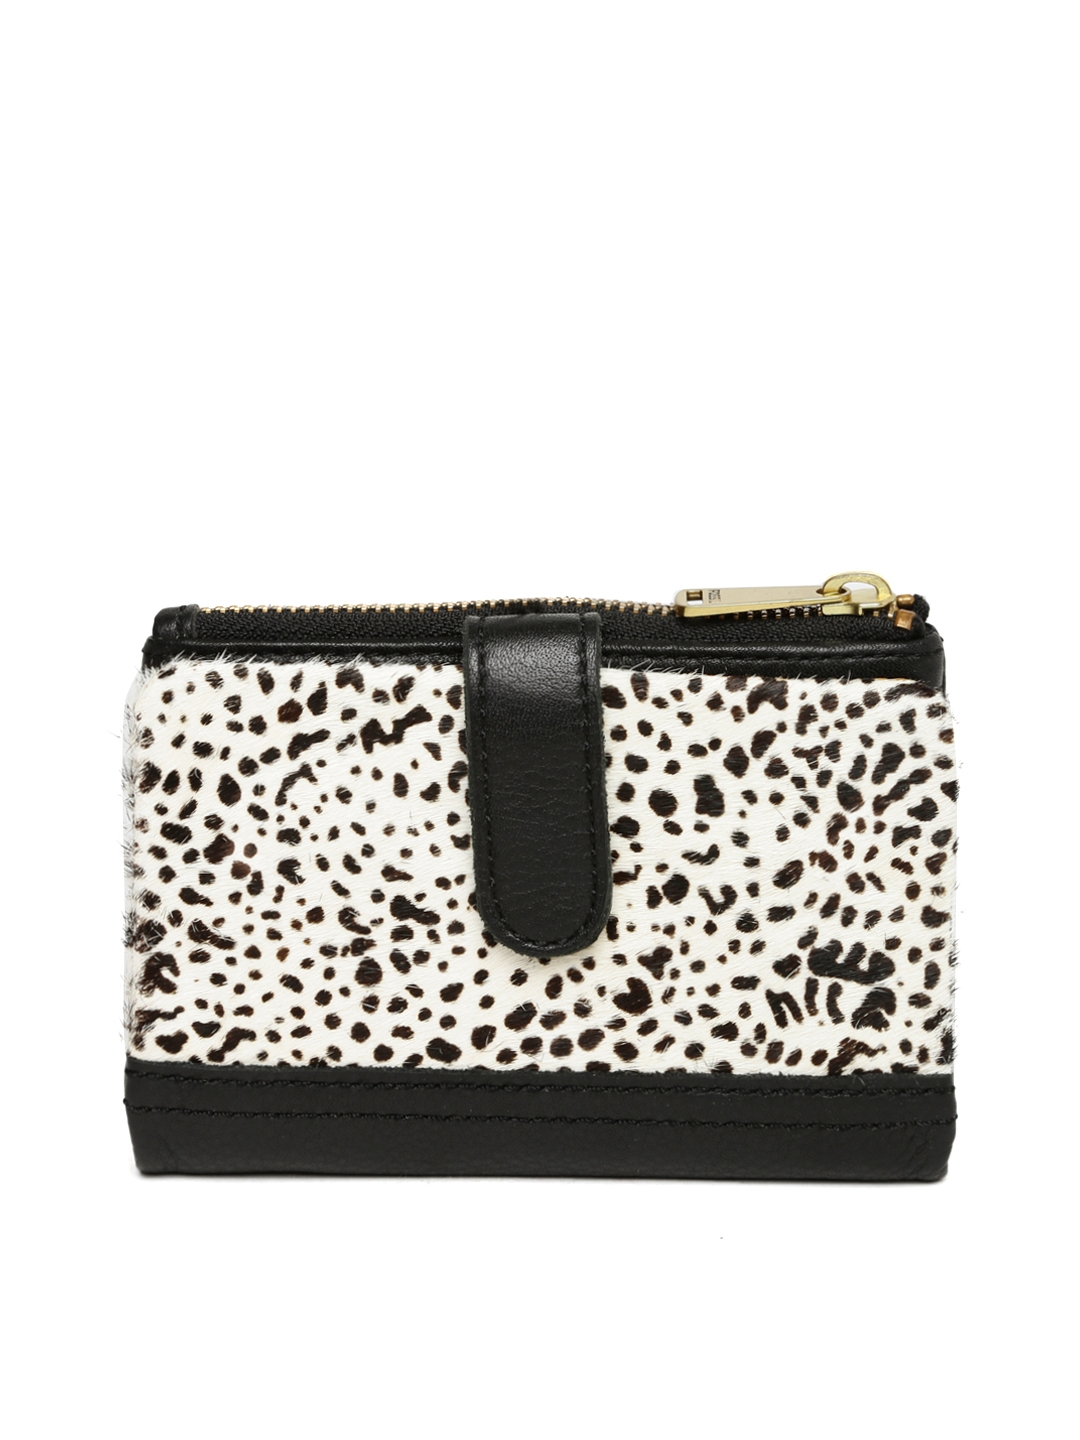 Fossil Black & Off-White Leather Animal Print Wallet